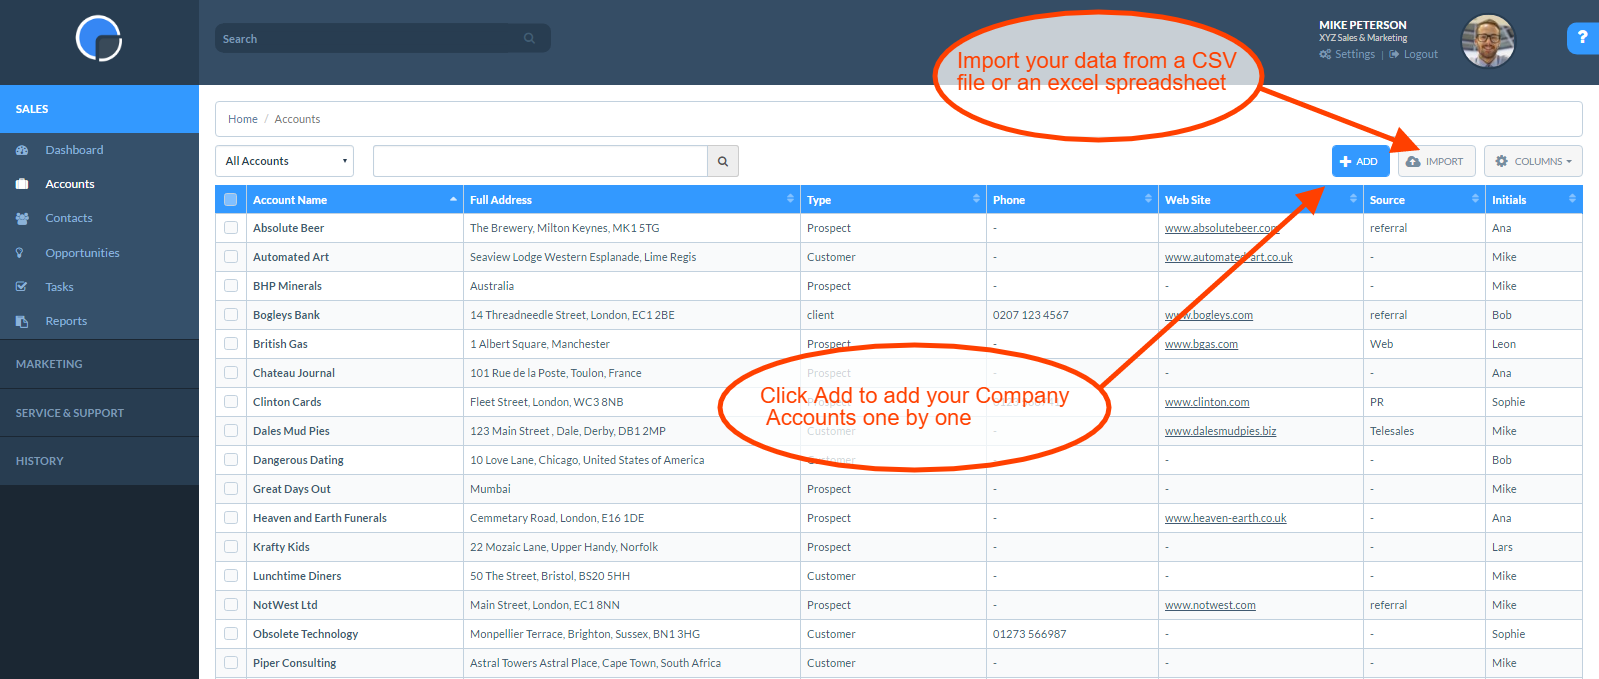 Add and Import data from the Accounts page